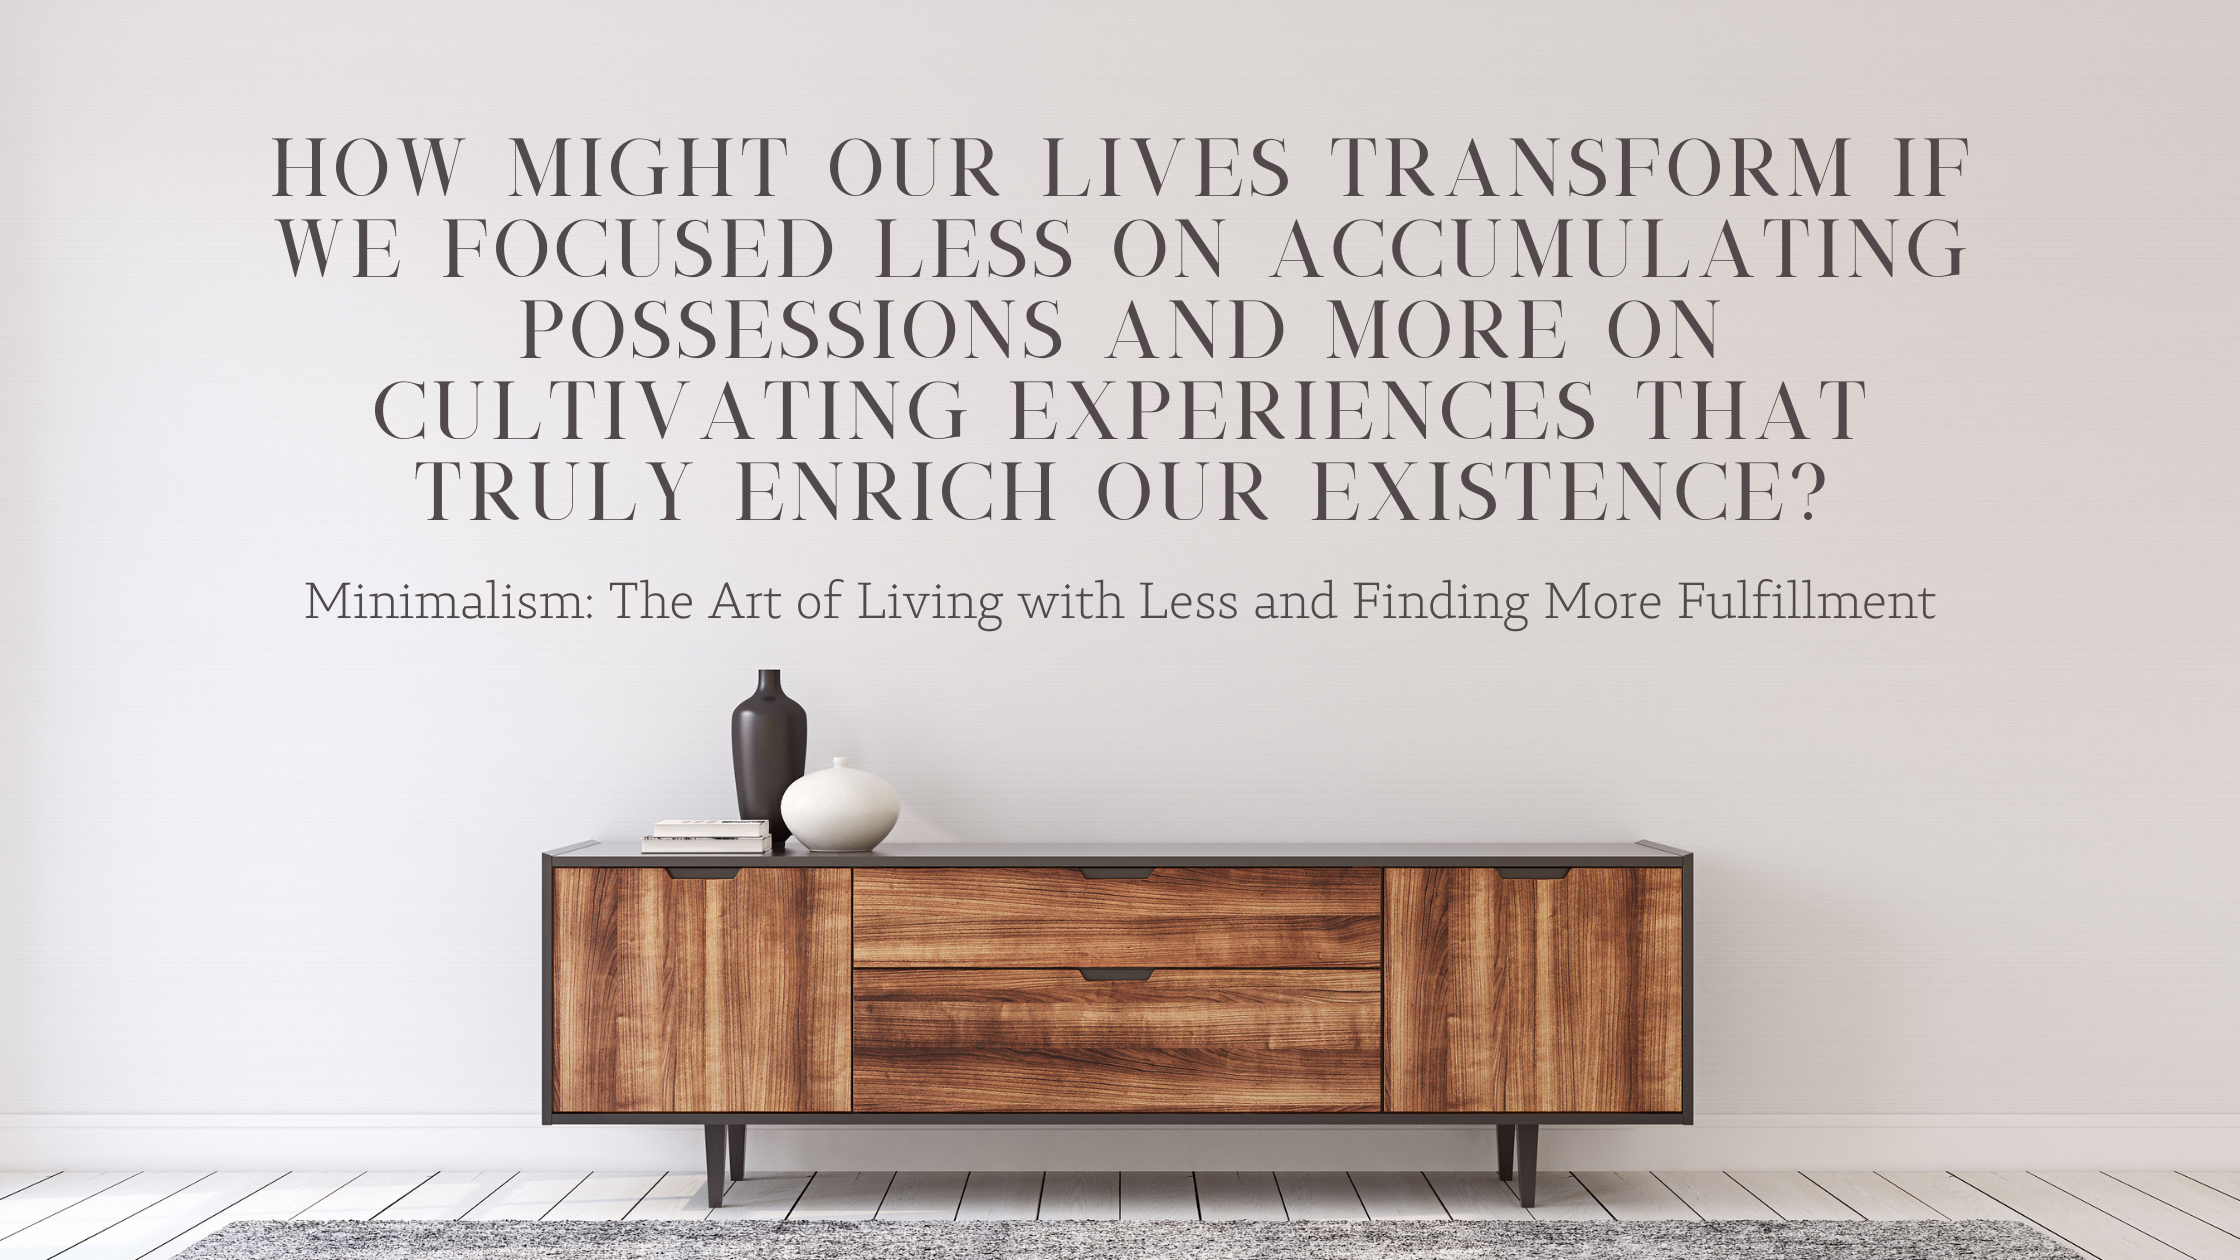 Minimalism: The Art of Living with Less and Finding More Fulfillment